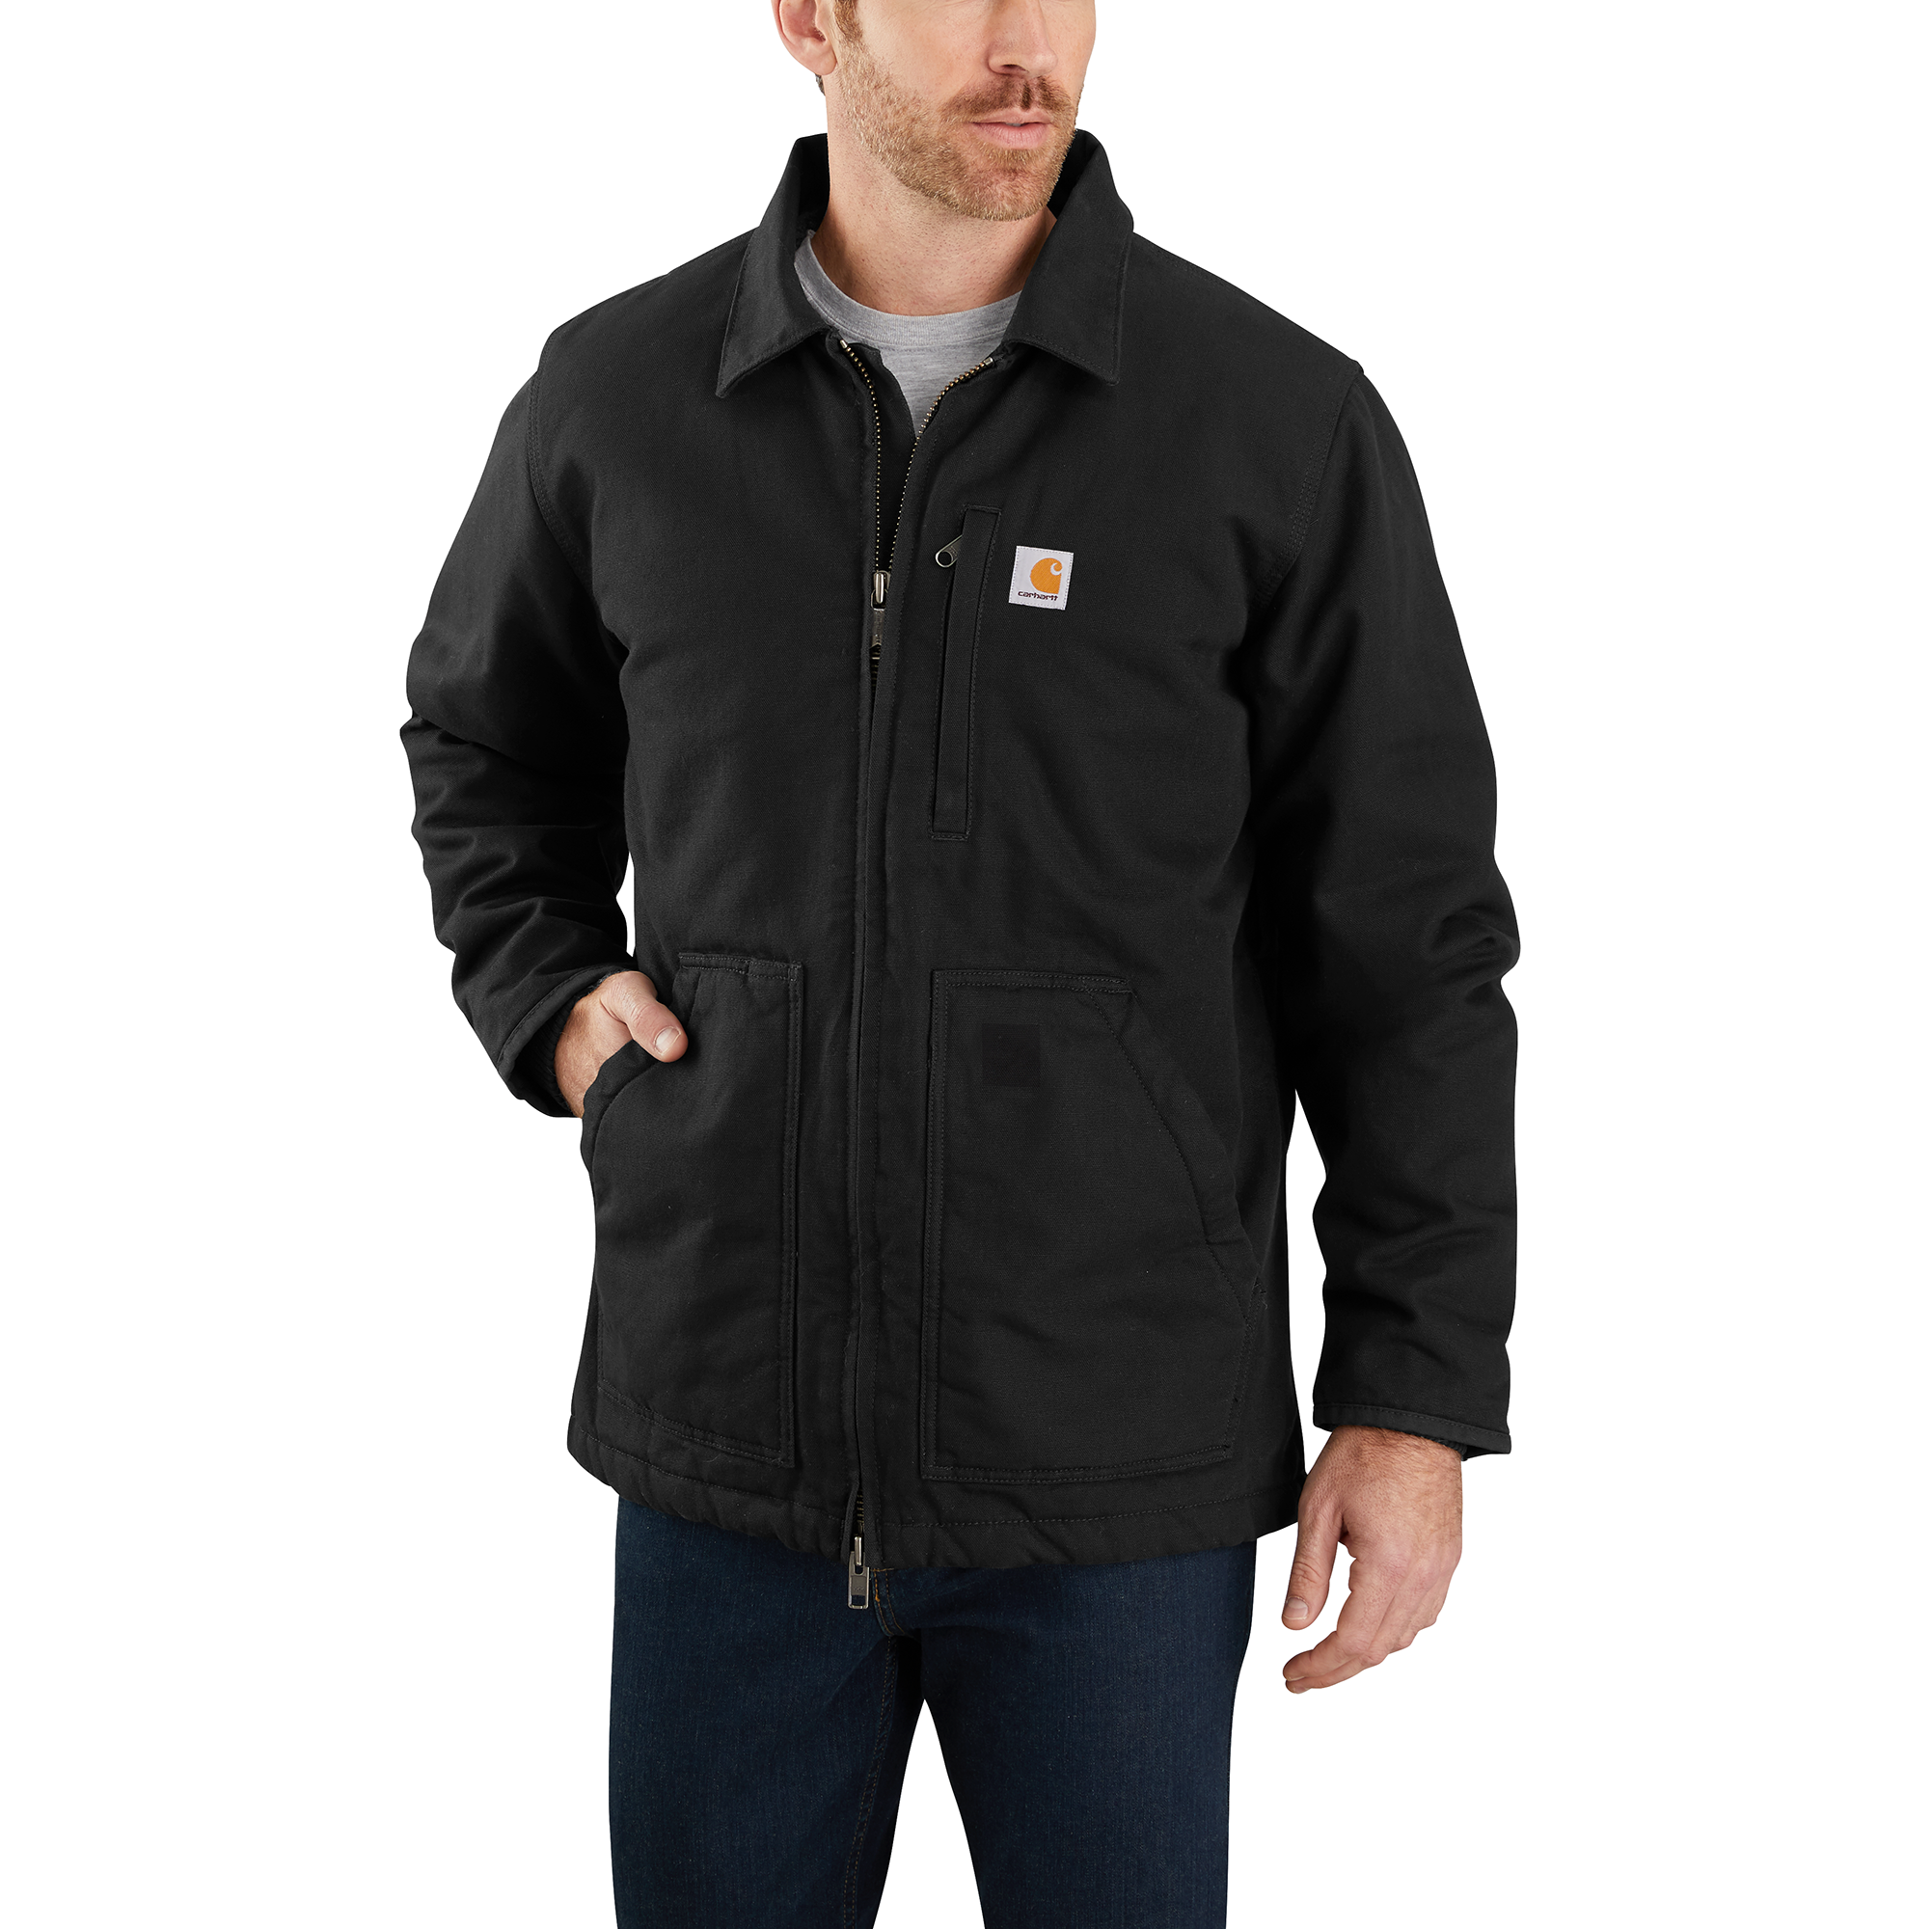 Carhartt Duck Washed Duck Sherpa Lined Coat - Tall - Mens